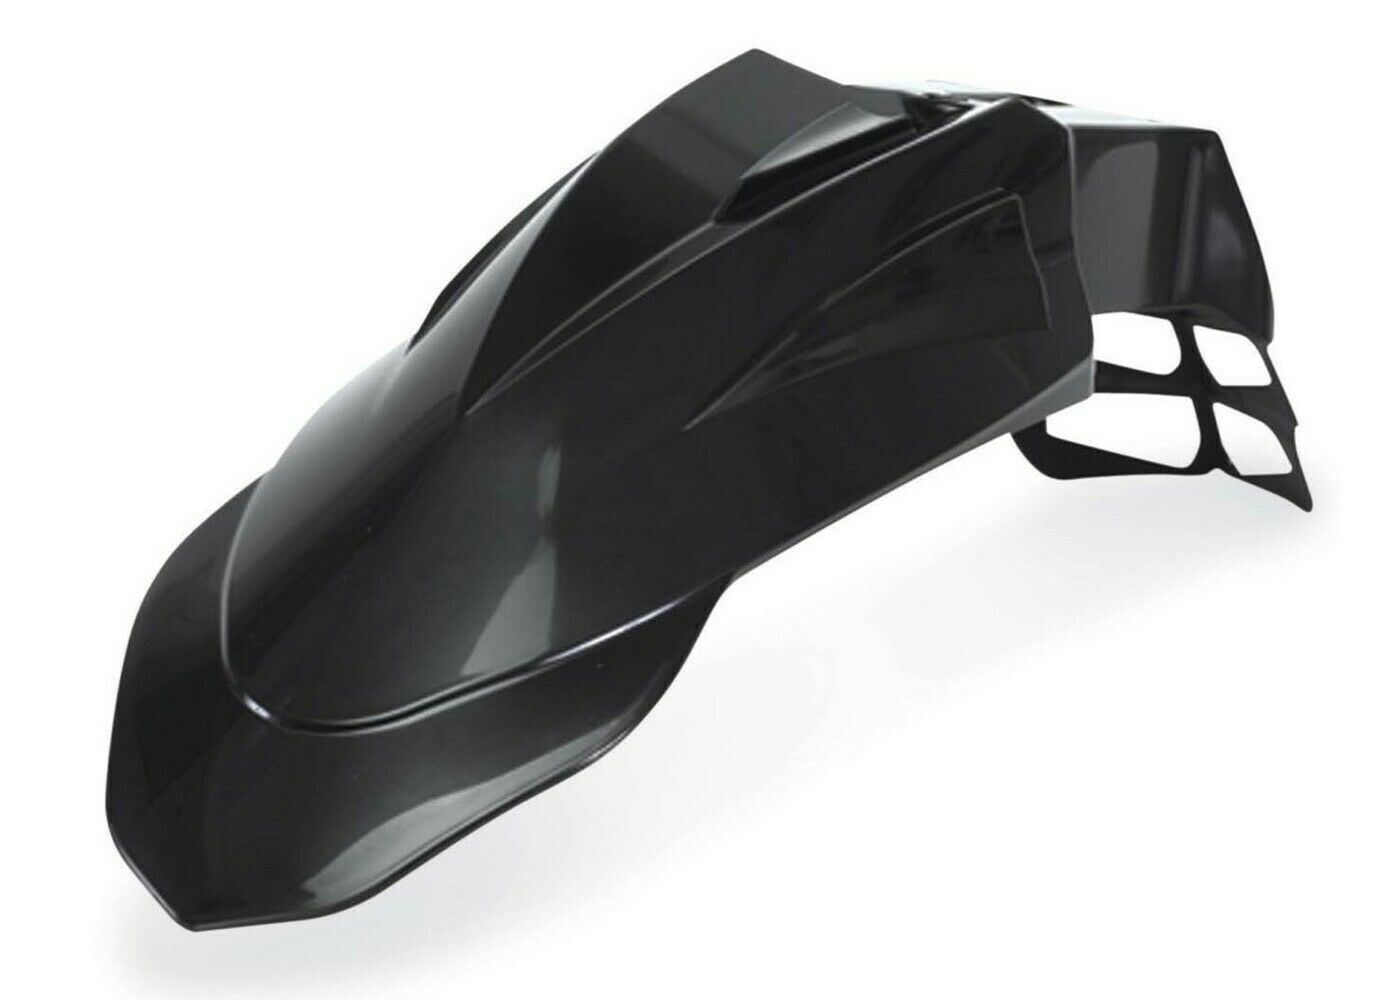 Acerbis Supermoto Front Fender - Your choice of colors